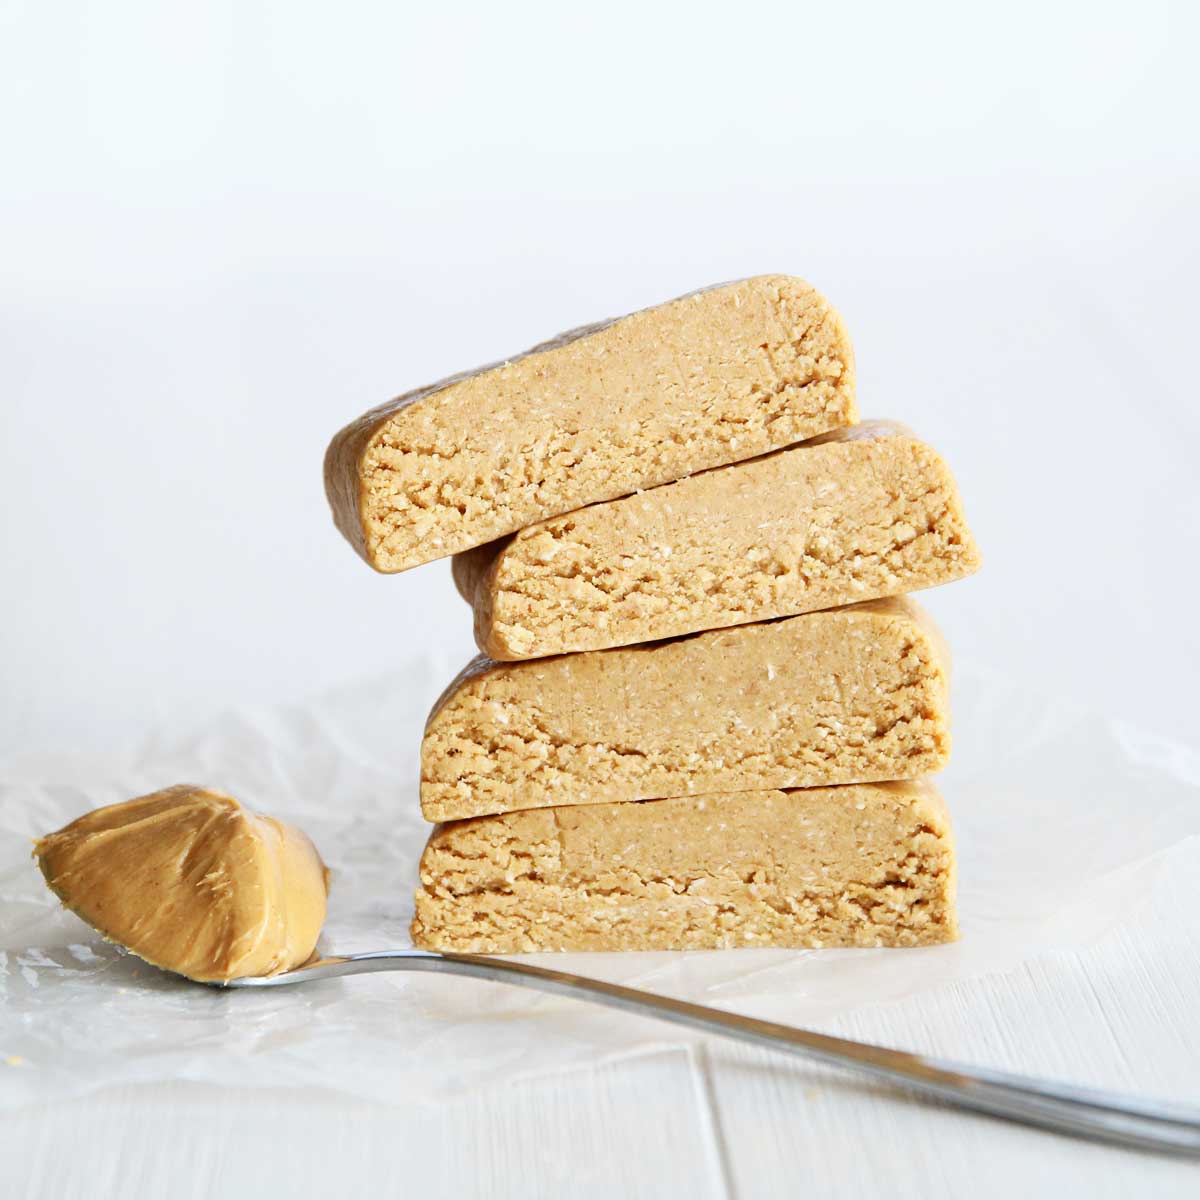 4-Ingredient Peanut Butter Oatmeal Protein Bars (Healthy, GF and Vegan) - yeast bread